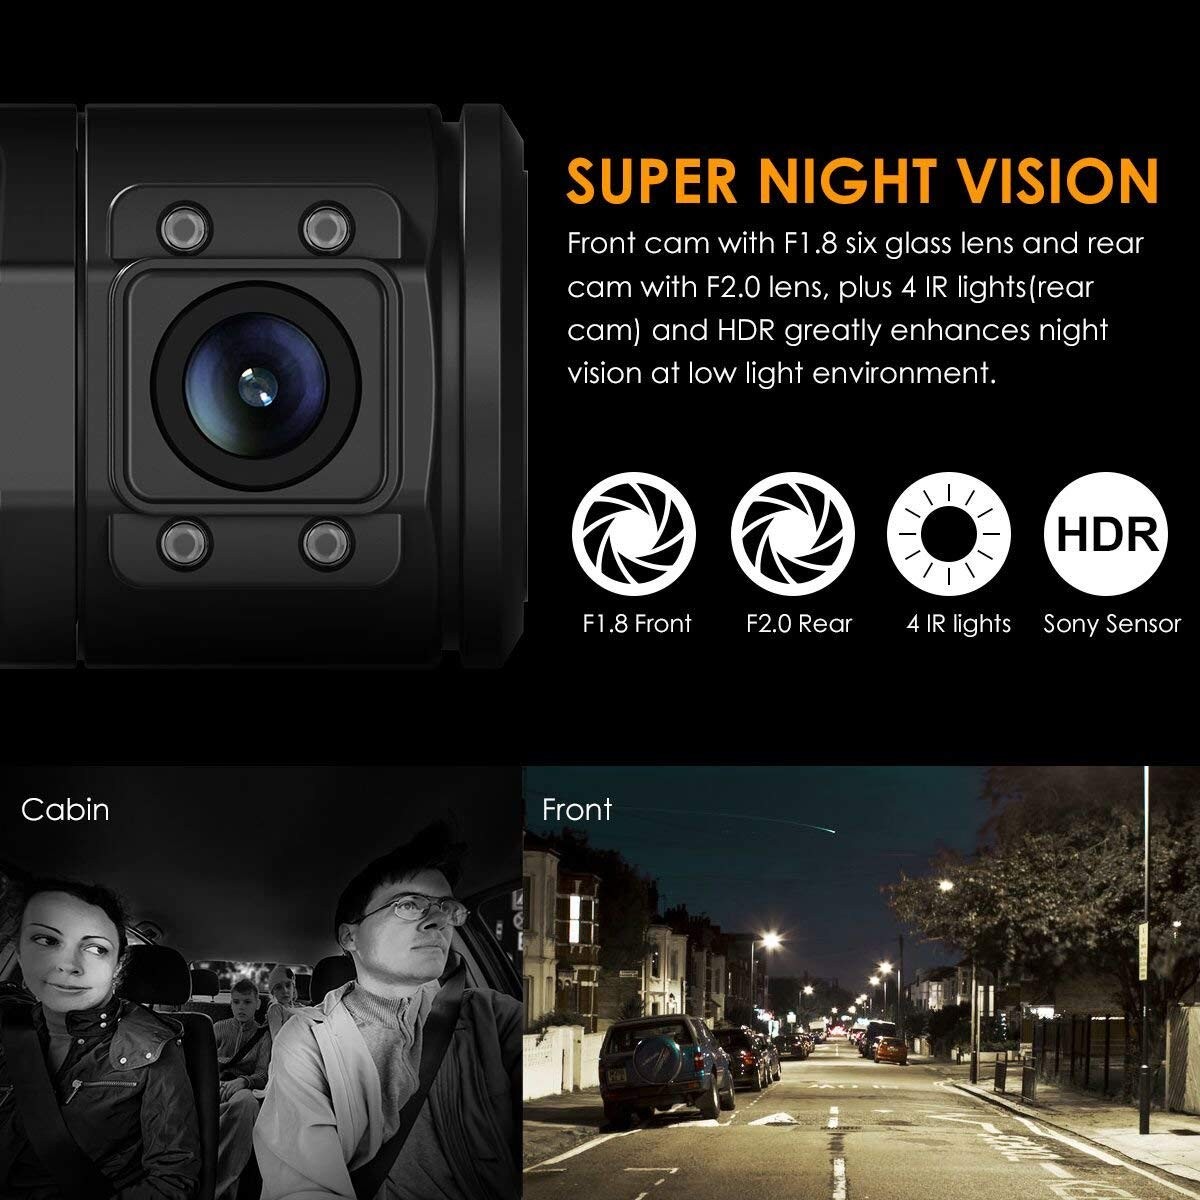 Buying Advance HQ Quality Dual DashCam with 8 Infra RED Lights Super Night Vision:1920X1080P HD+GPS,Unbeatable:-5F°~150F°,Wide Angle,G-Sensor,Motion Detect&Free Kingston 32GB SD BBS Electronics in-Cabin & Road Cam 